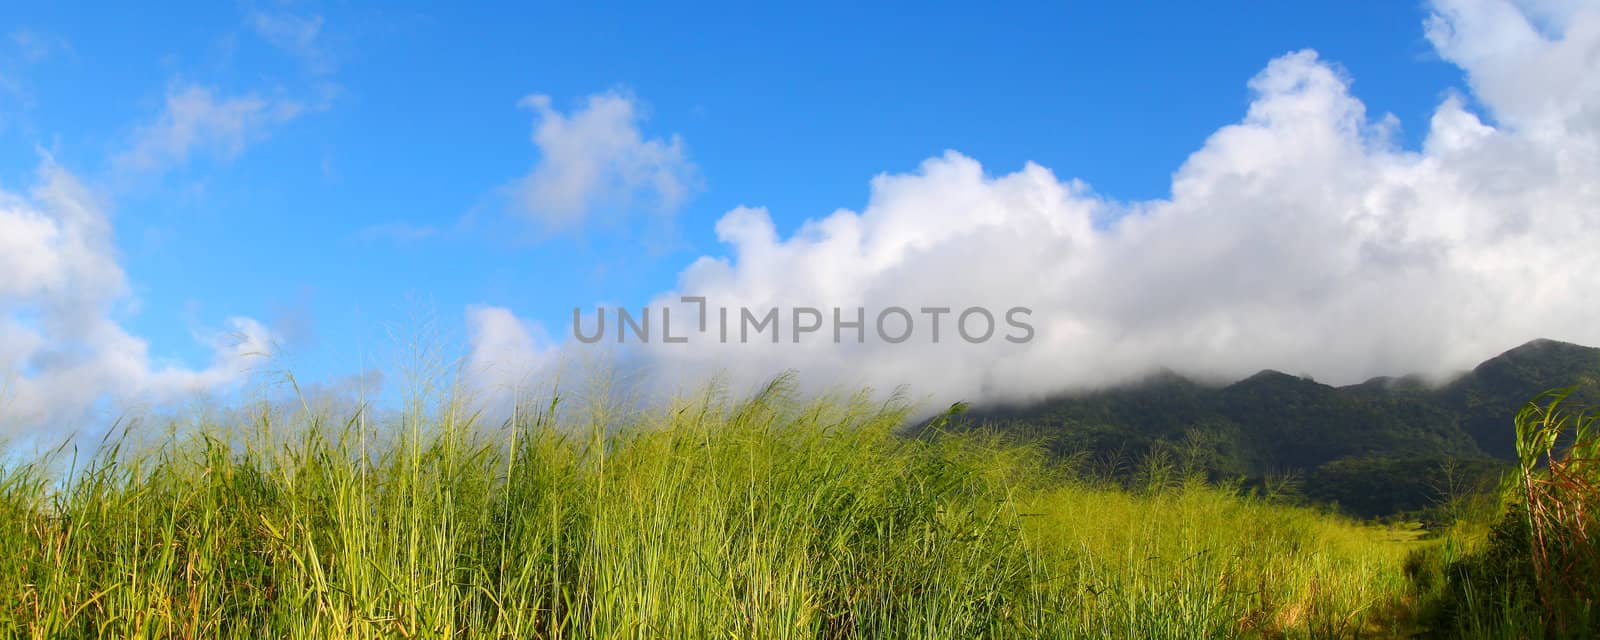 Mount Liamuiga in Saint Kitts by Wirepec